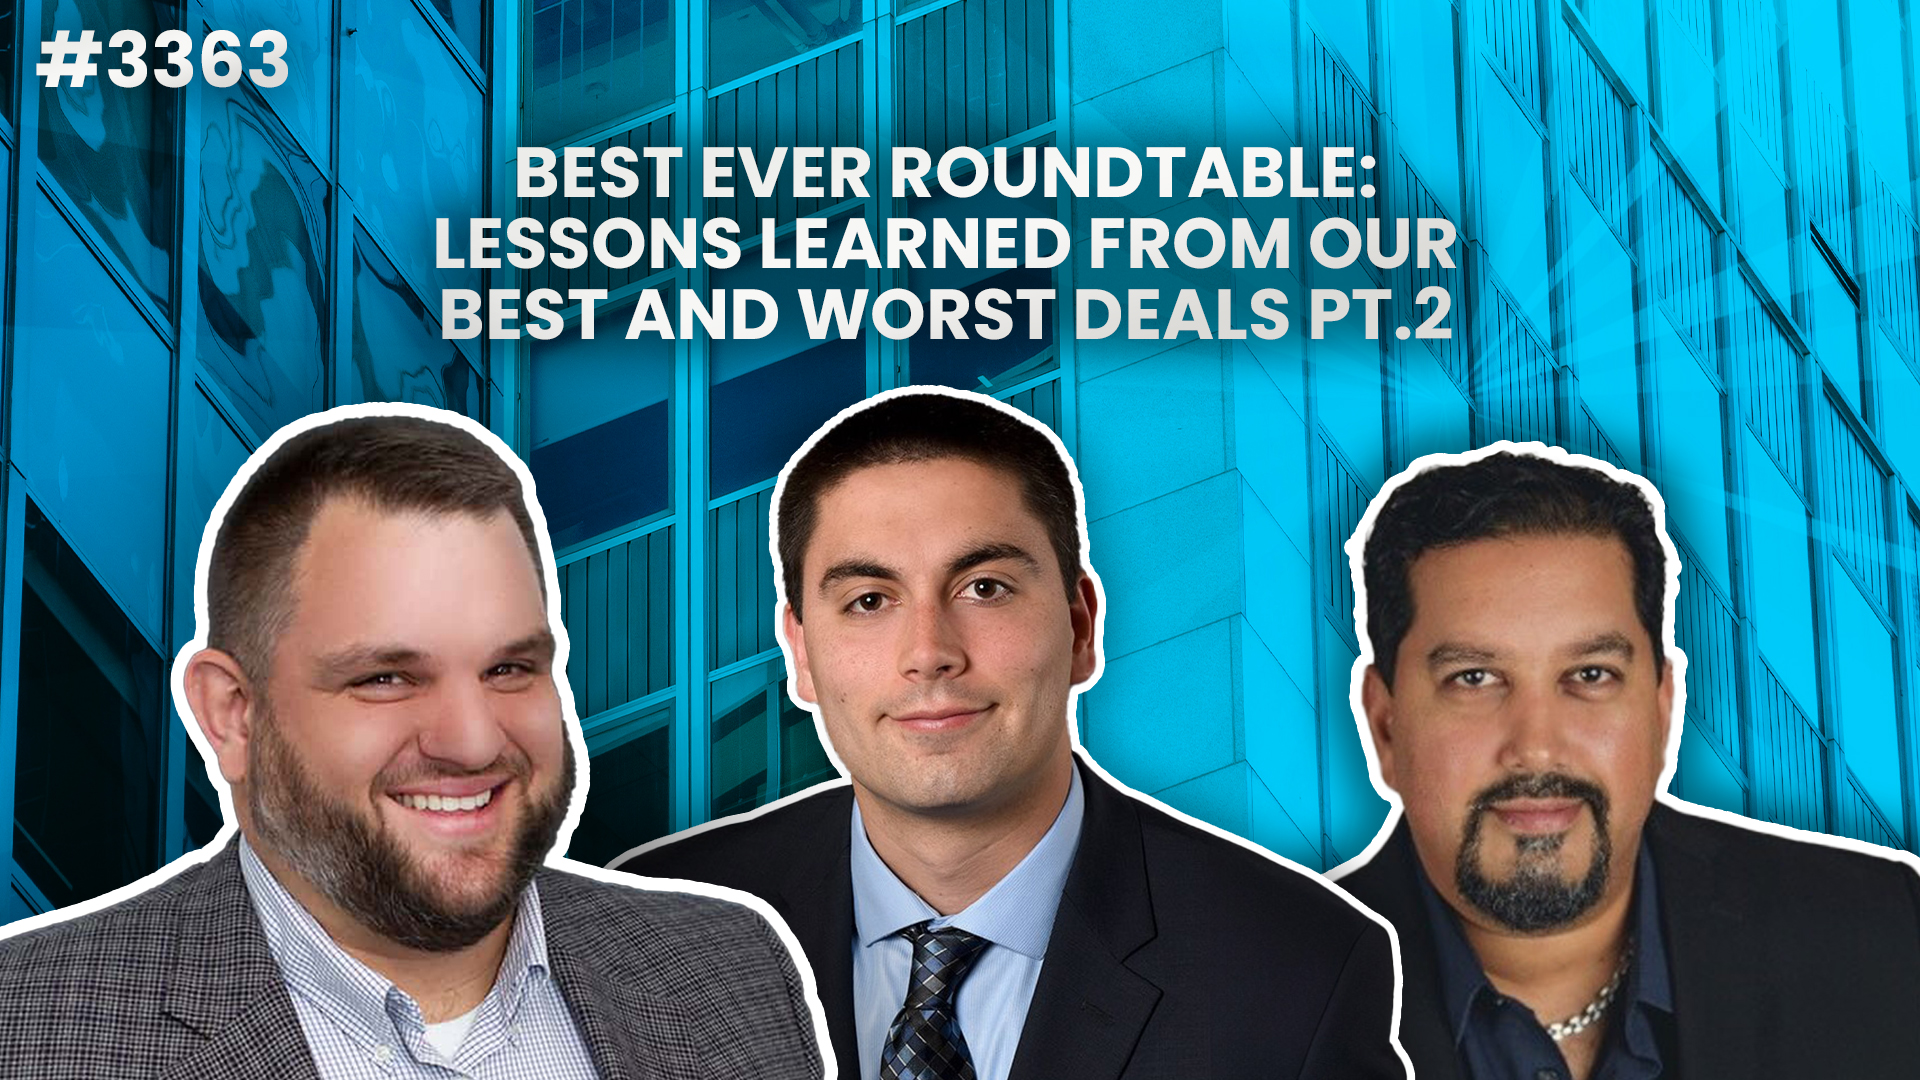 JF3363: Best Ever Roundtable: Lessons Learned from our Best and Worst Deals Pt.2